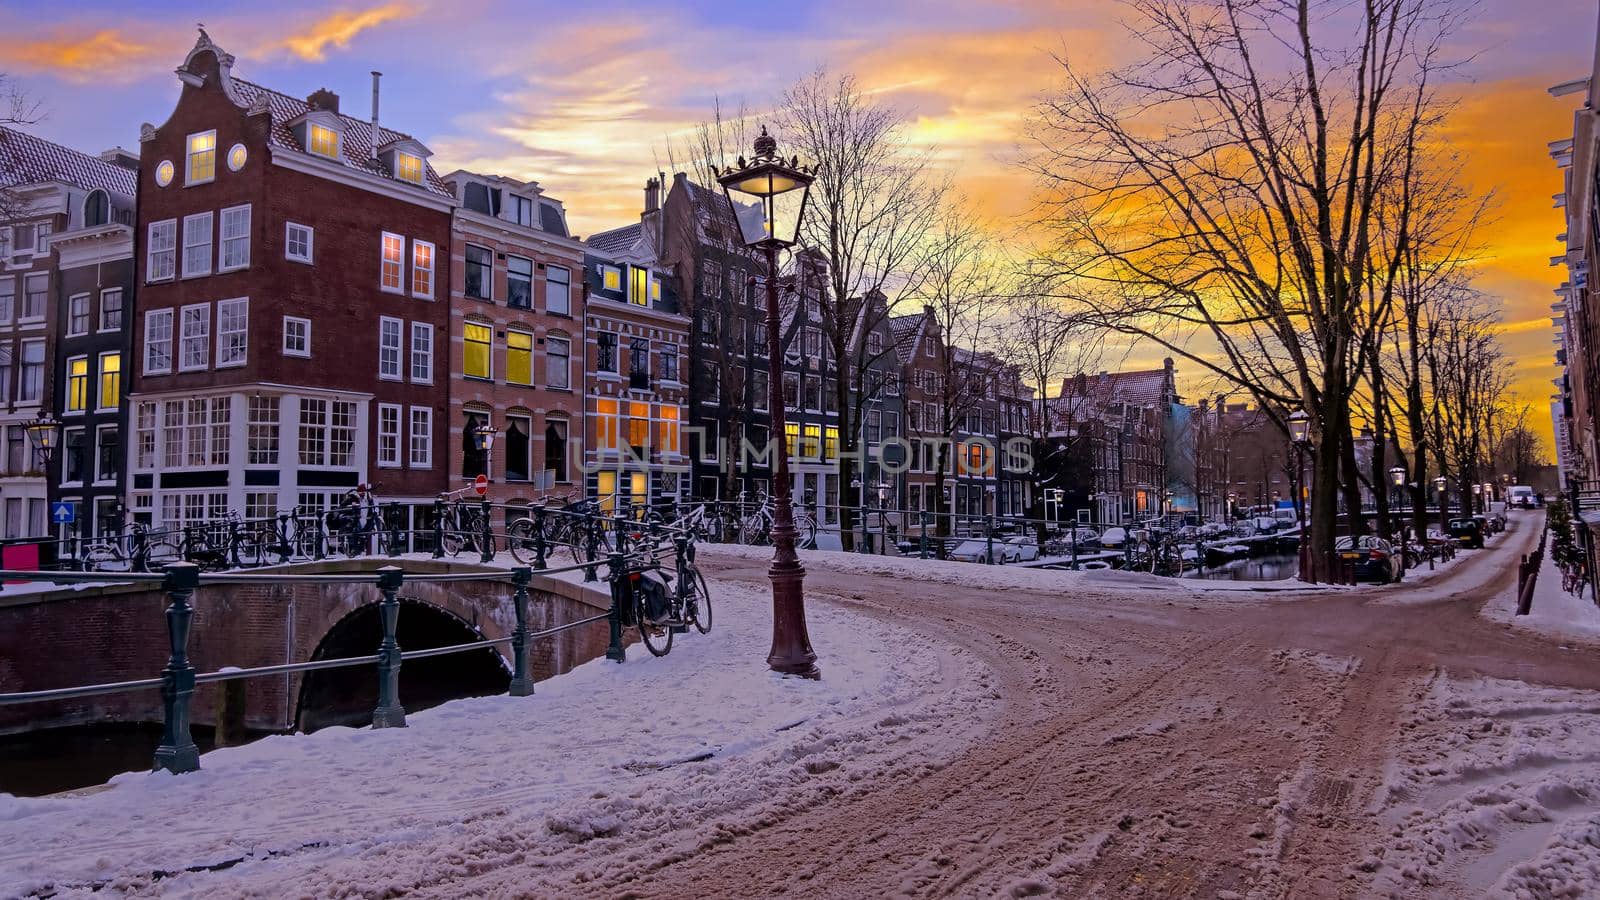 City scenic from a snowy Amsterdm in winter in the Netherlands at sunset by devy